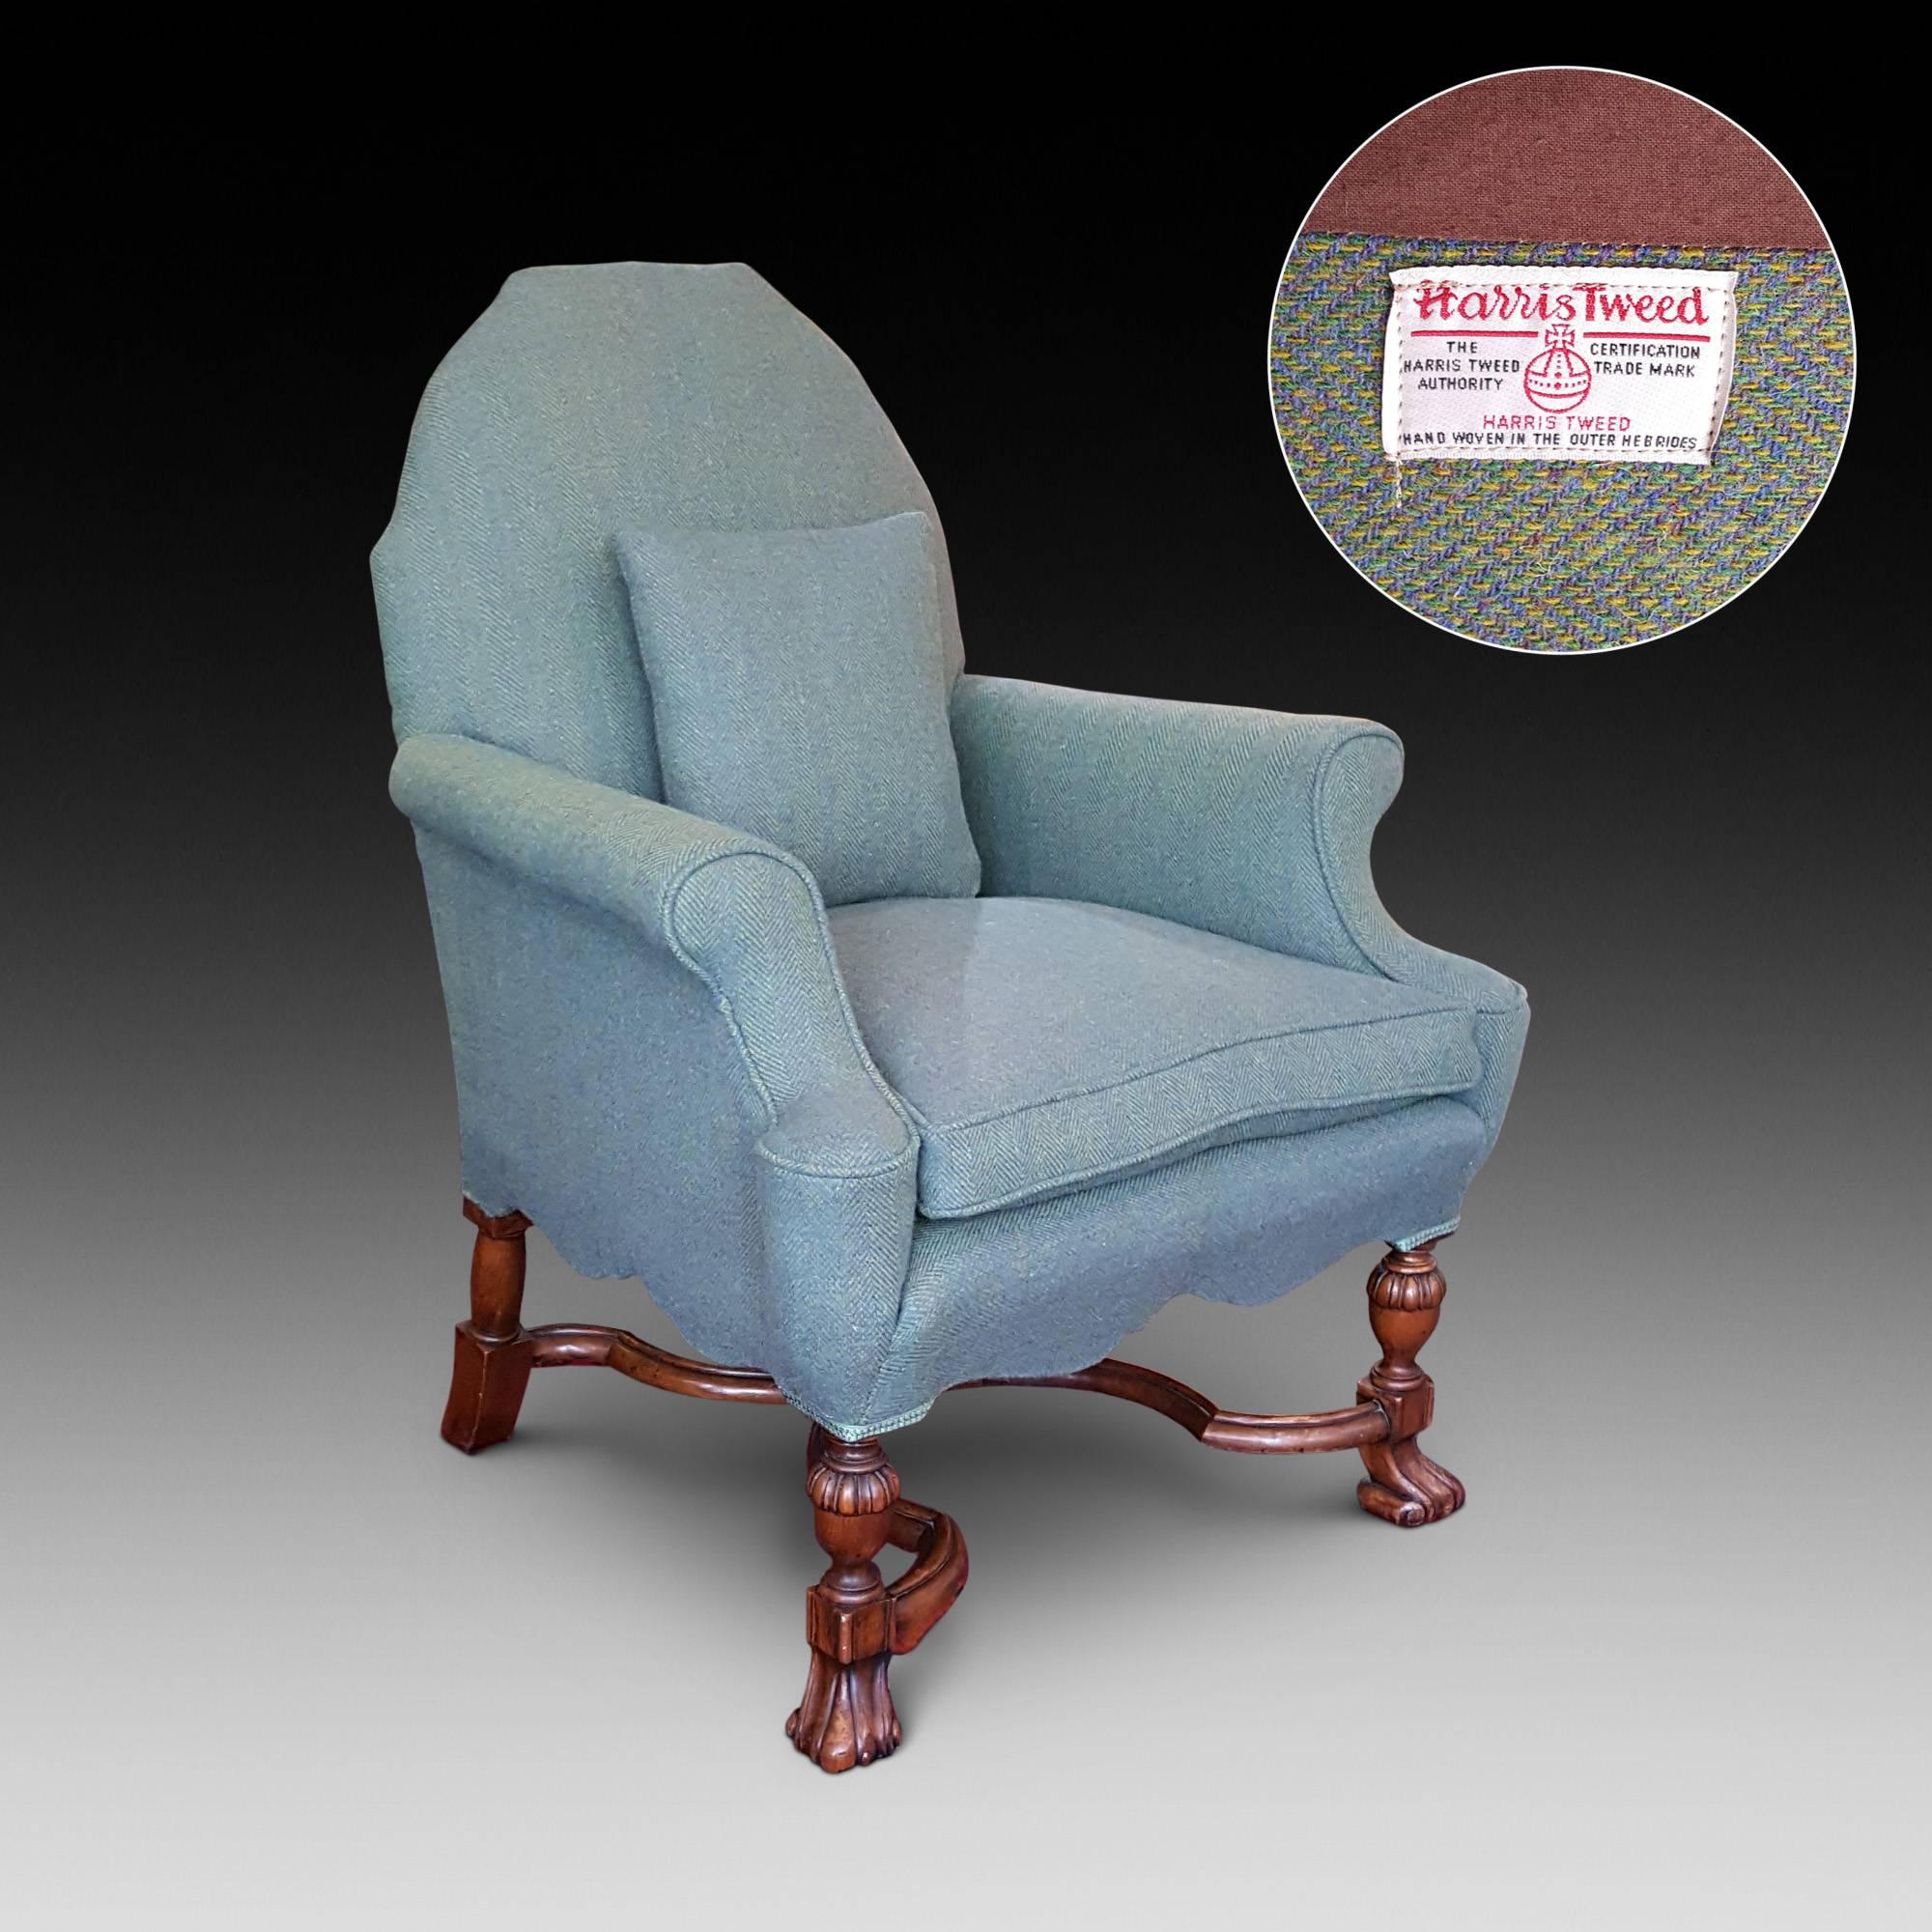 Edwardian mahogany armchair in the Jacobean style upholstered in Harris Tweed
Measure: 31